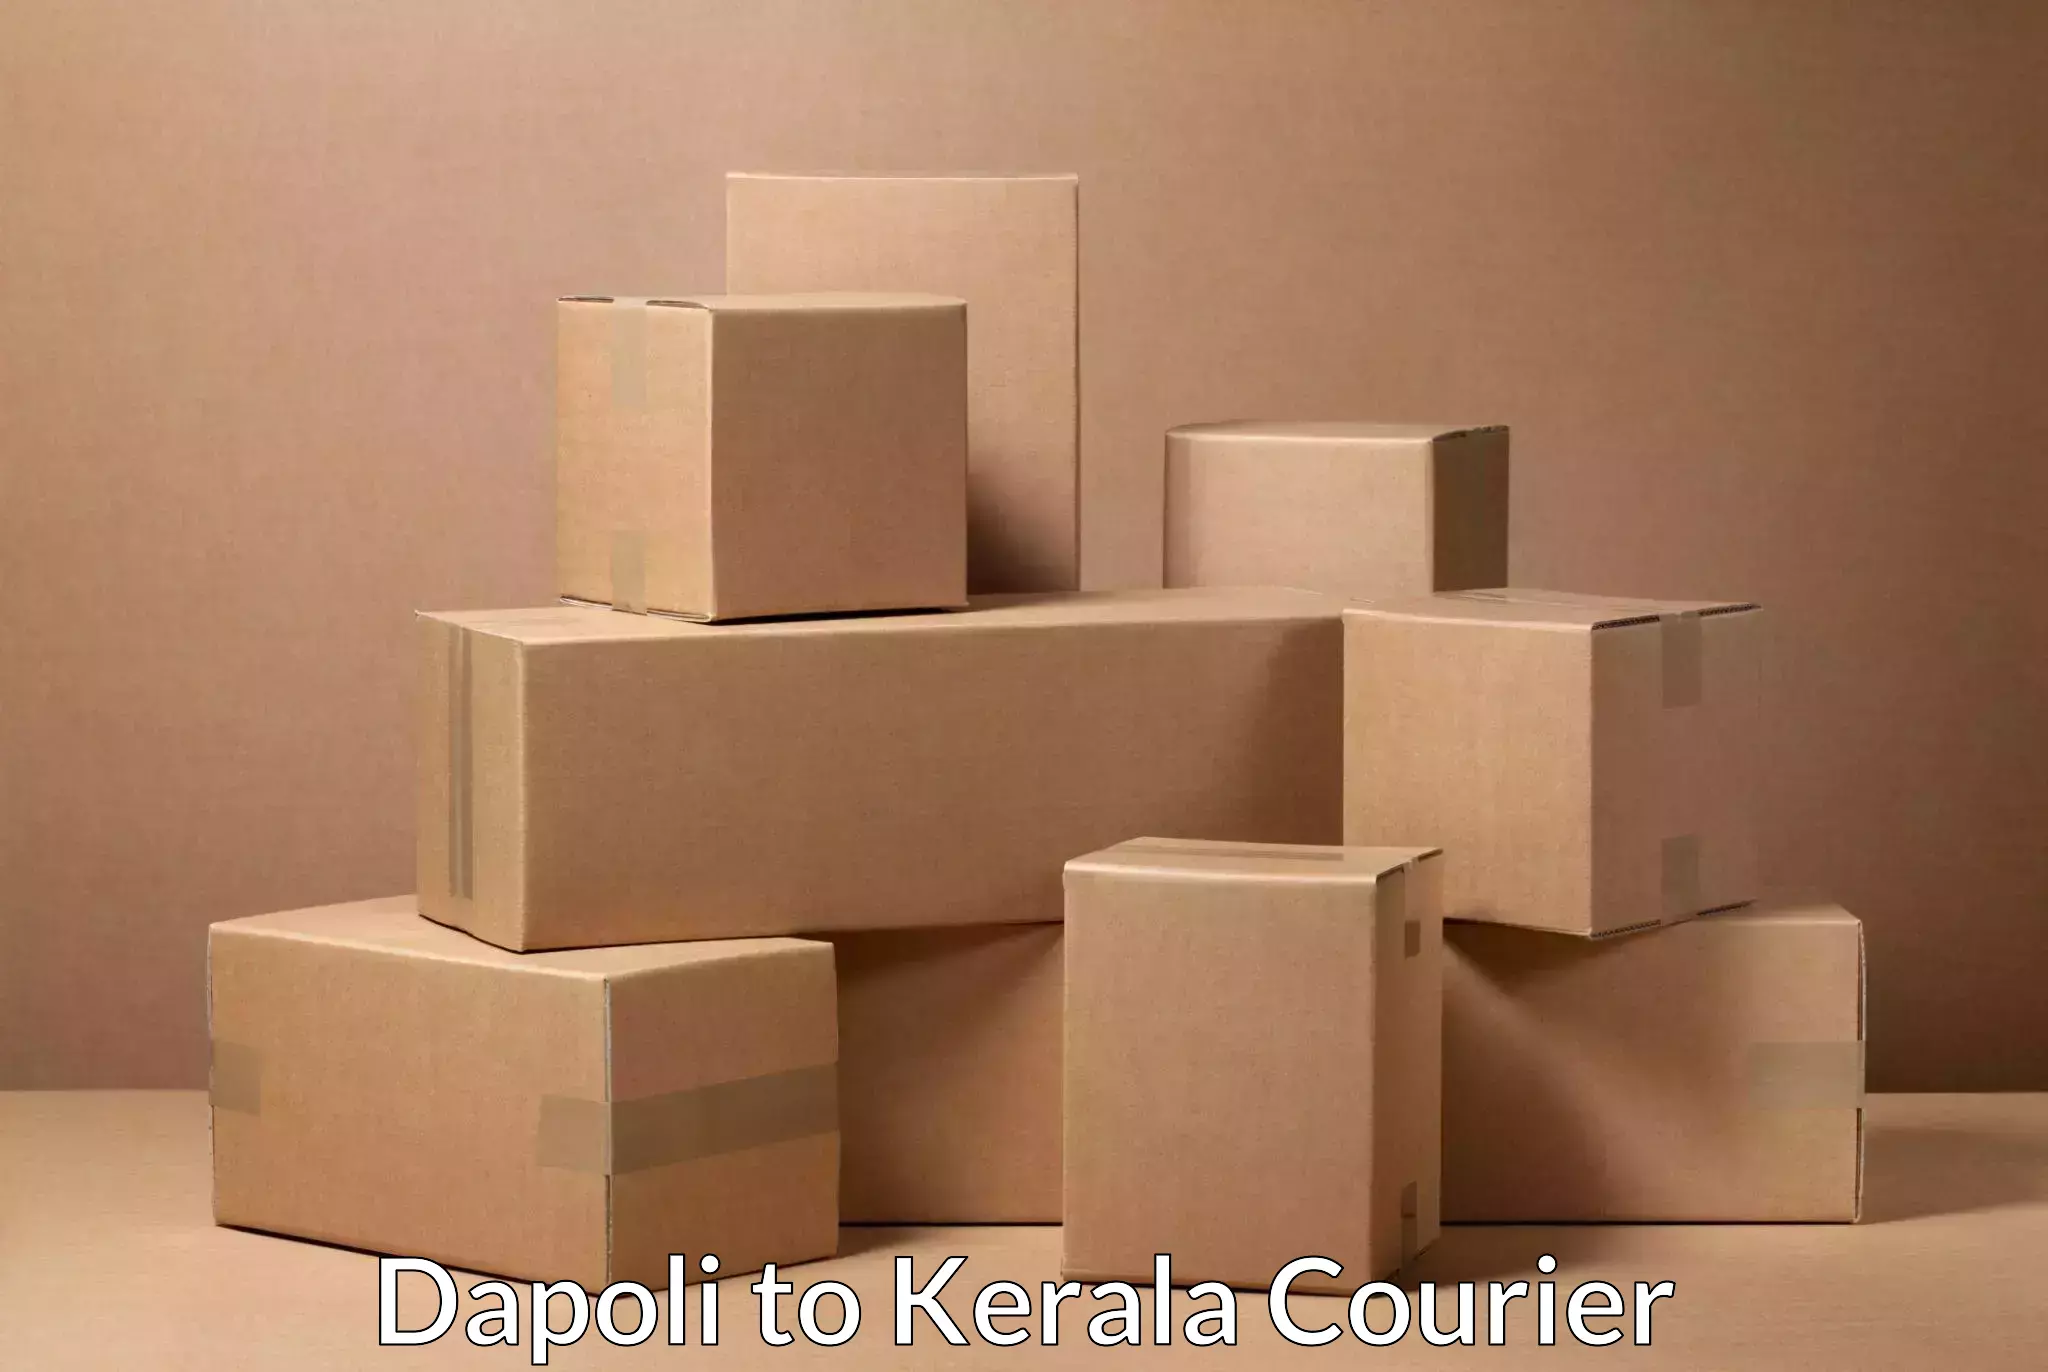 Express package delivery Dapoli to Kozhikode